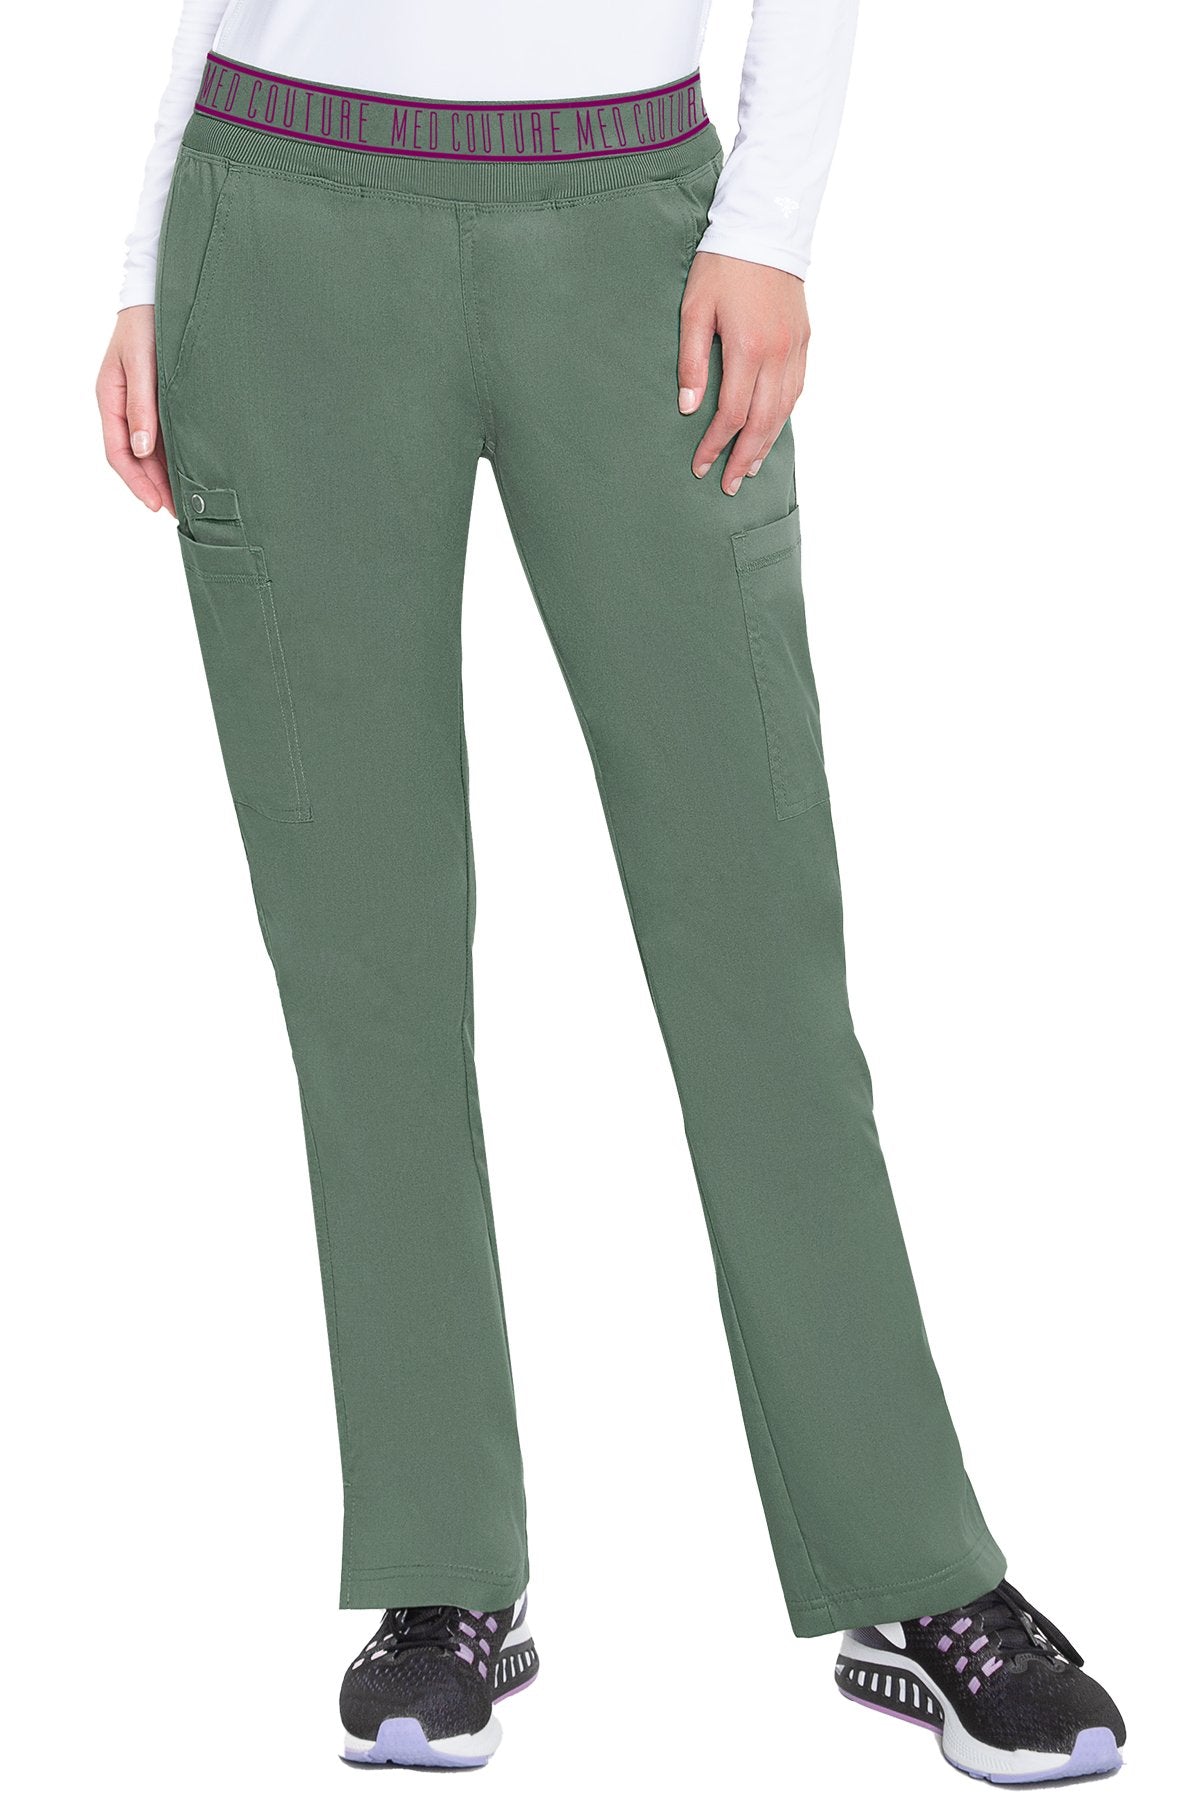 Yoga 2 Cargo Pocket Pant by Med Couture (Tall) XS-5XL/ Olive